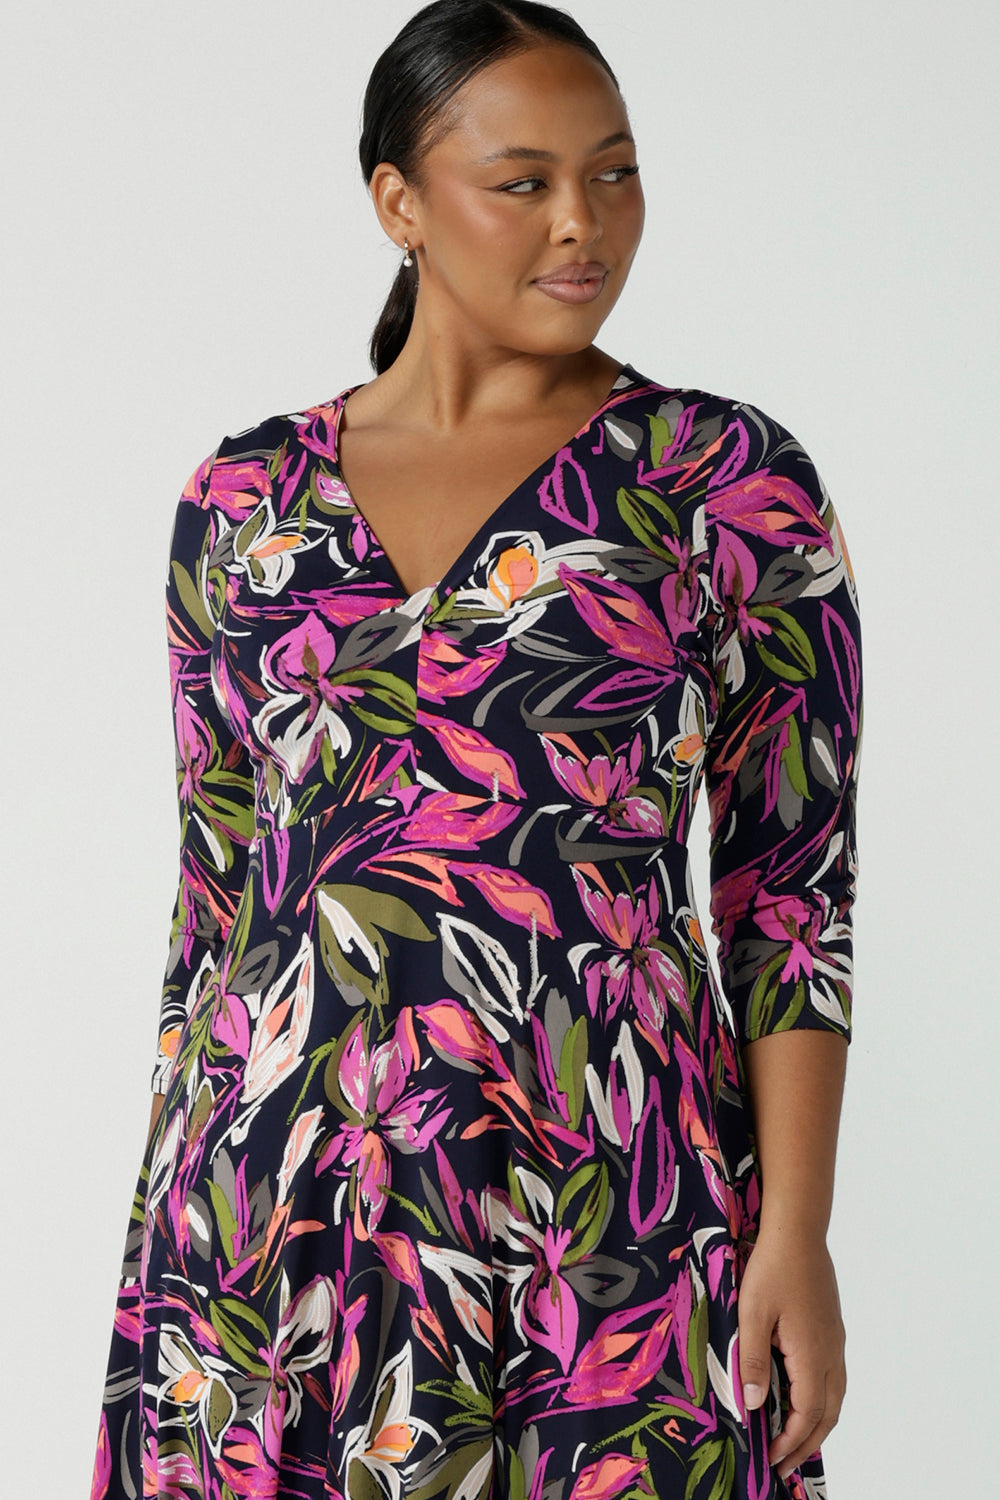 Close up of a size 16 woman wears a Kyra dress in Vivid Flora. Empire line fit and flare style with a 3/4 sleeve. Twist front neckline. Flattering shape for all sizes 8 - 24. Made in Australia for corporate casual women.